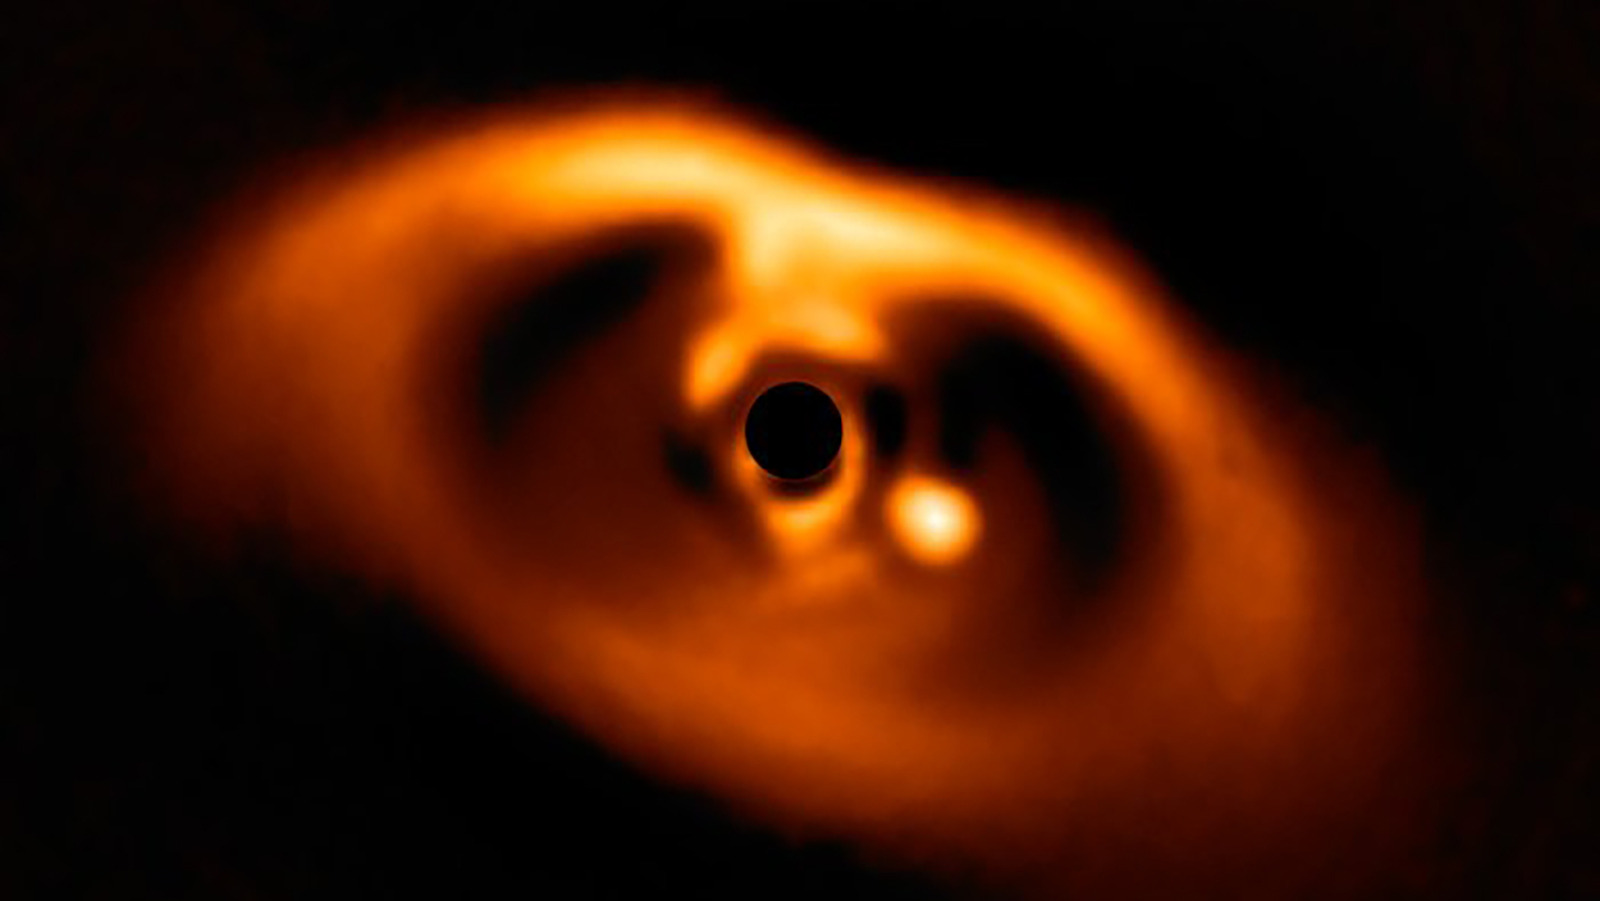 This spectacular image from the SPHERE instrument on ESO's Very Large Telescope is the first clear image of a planet caught in the very act of formation around the dwarf star PDS 70. The planet stands clearly out, visible as a bright point to the right of the centre of the image, which is blacked out by the coronagraph mask used to block the blinding light of the central star.